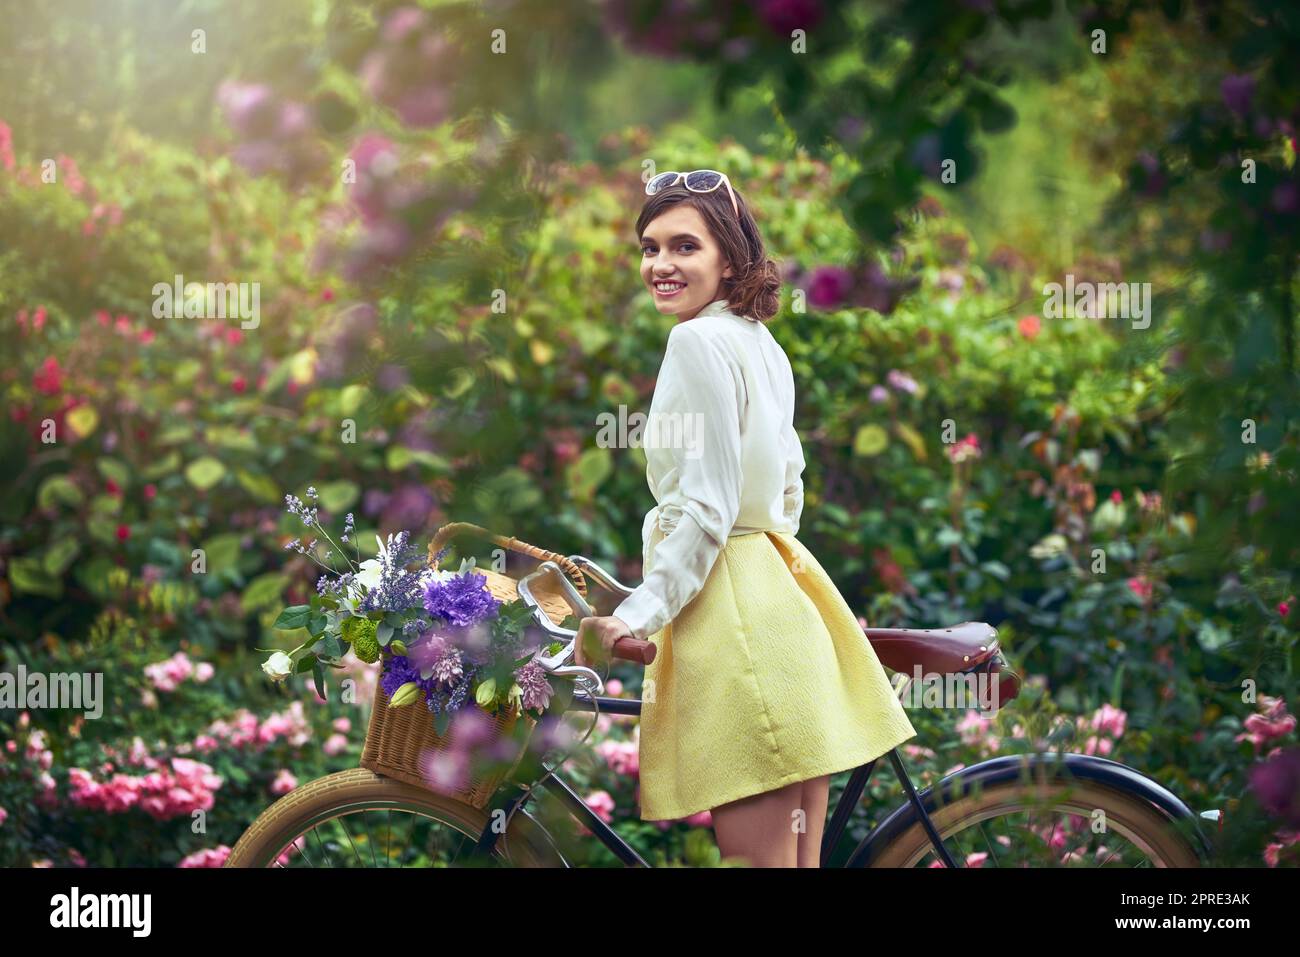 Her beauty outshines even the picturesque landscape. Portrait of an attractive young woman riding a bicycle outdoors. Stock Photo